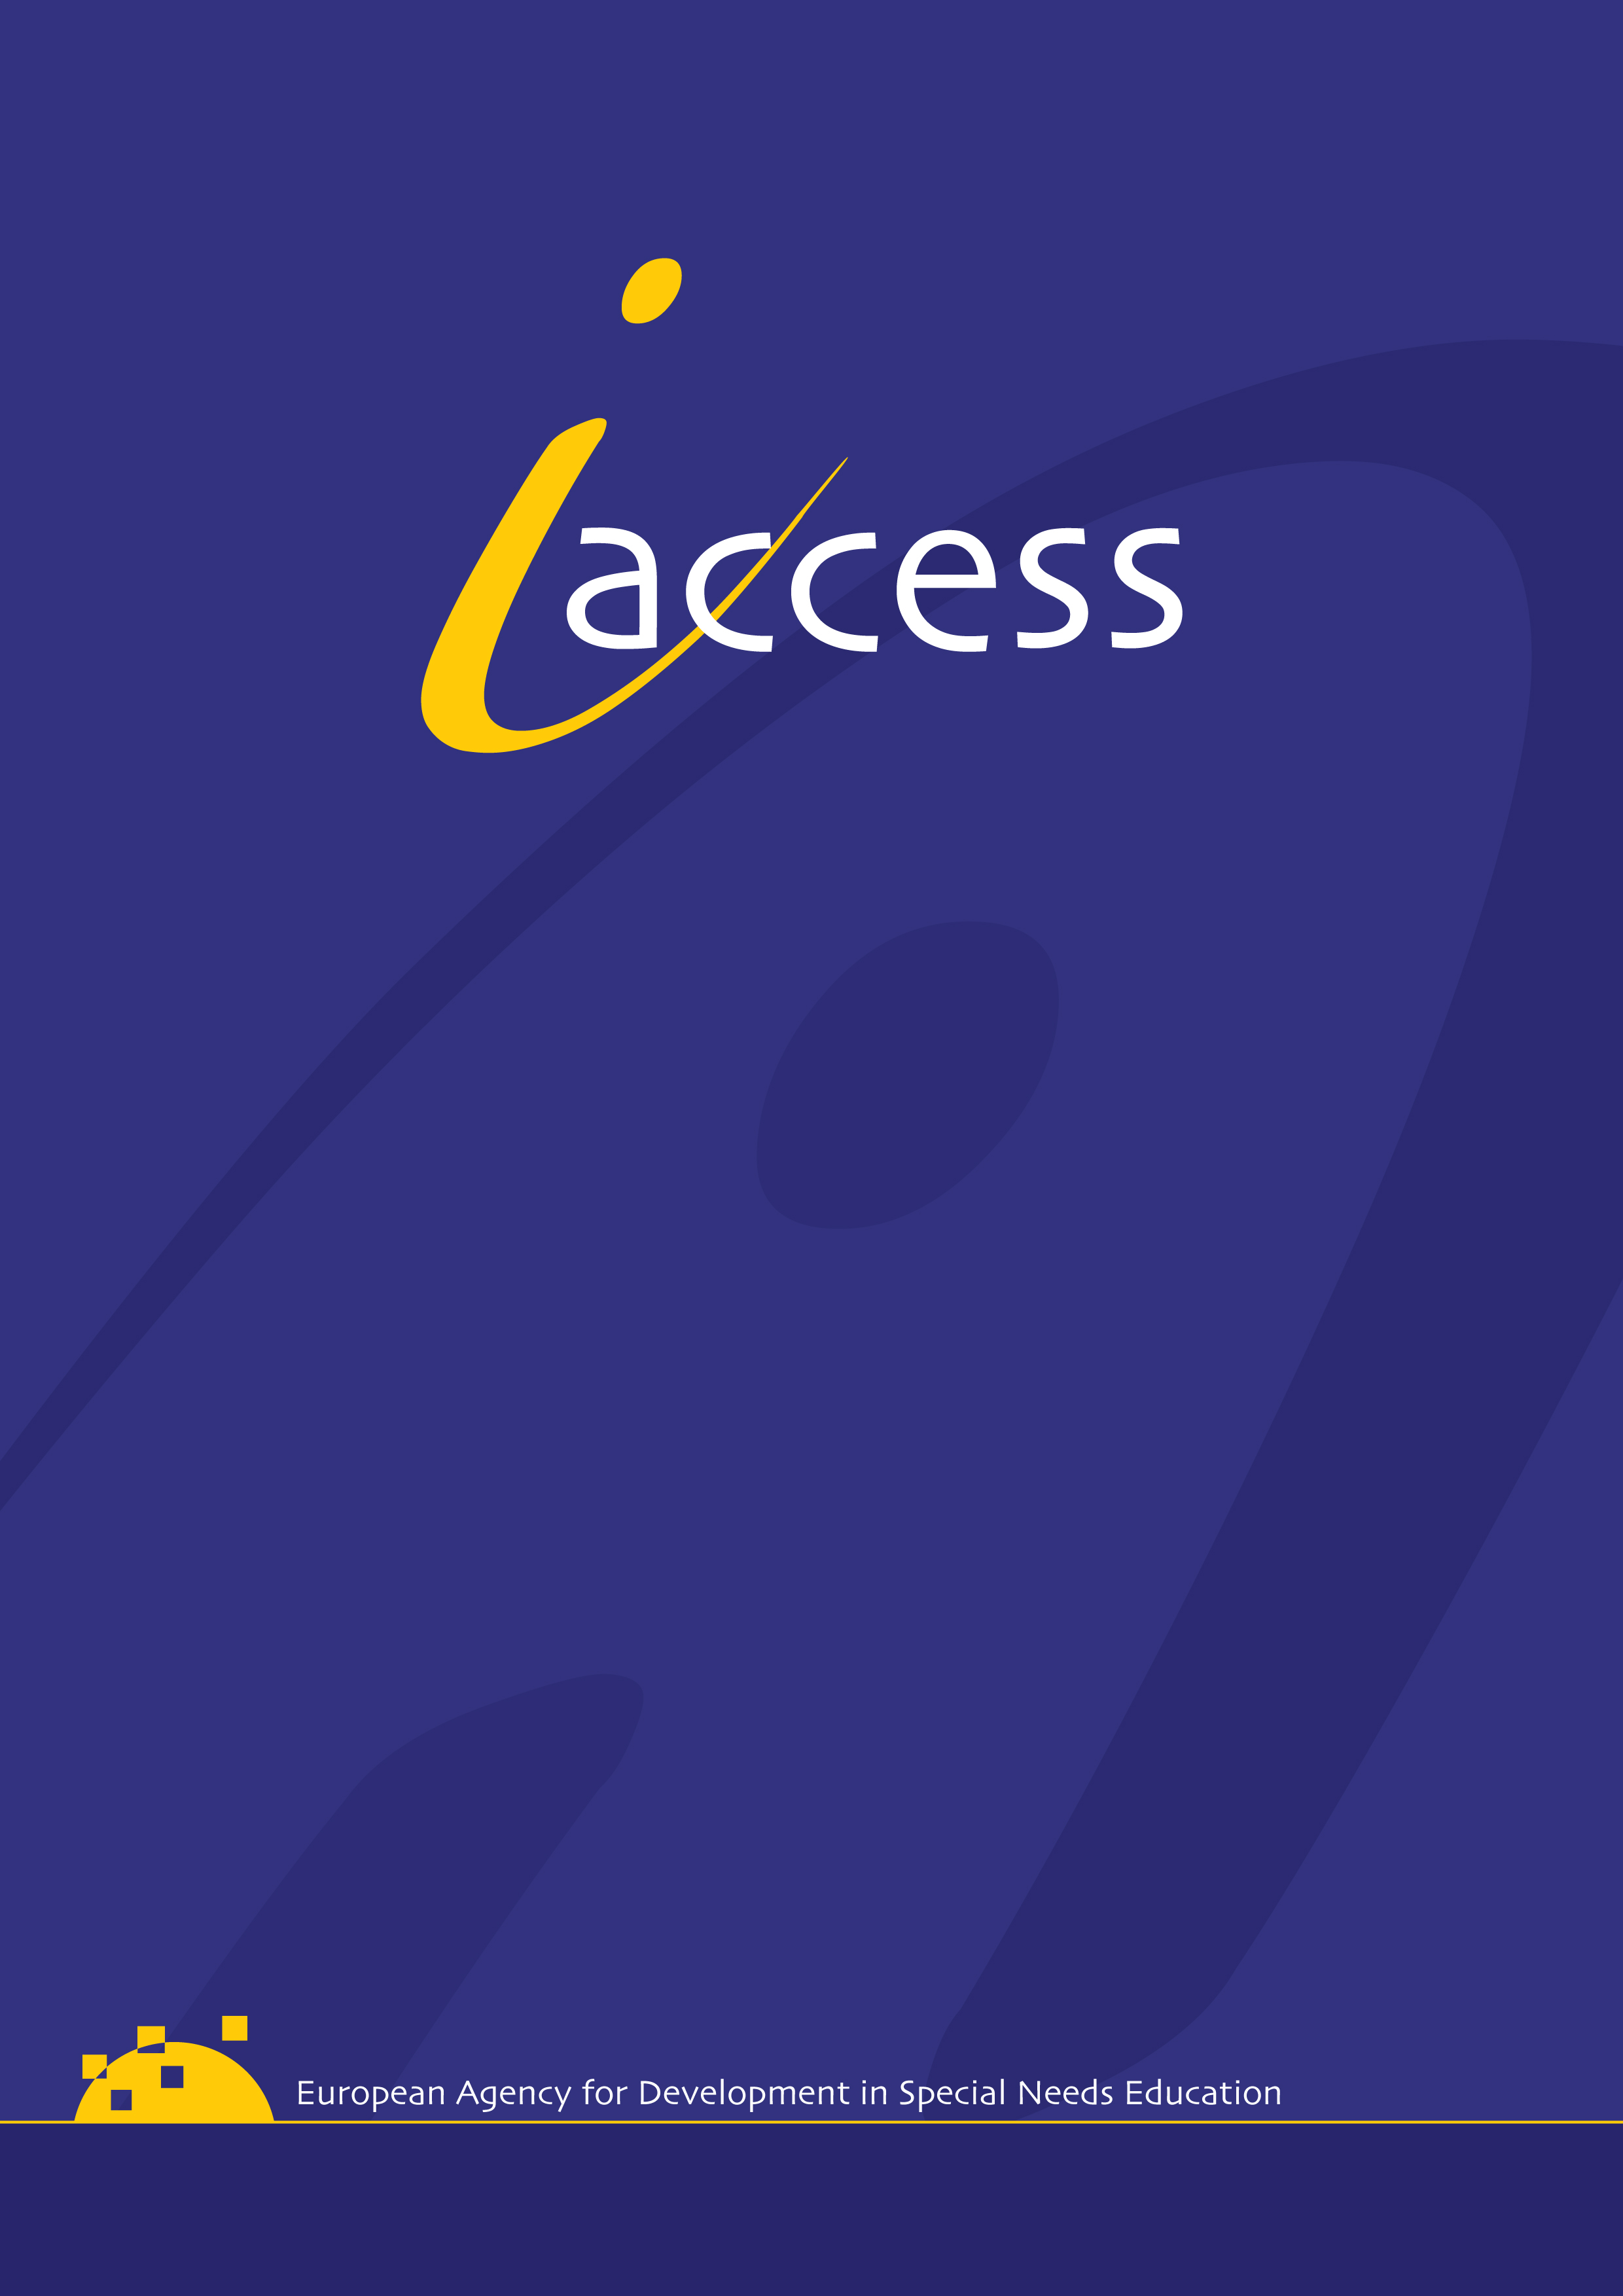 Accessible Information for Lifelong Learning (i-access) Recommendations flyers